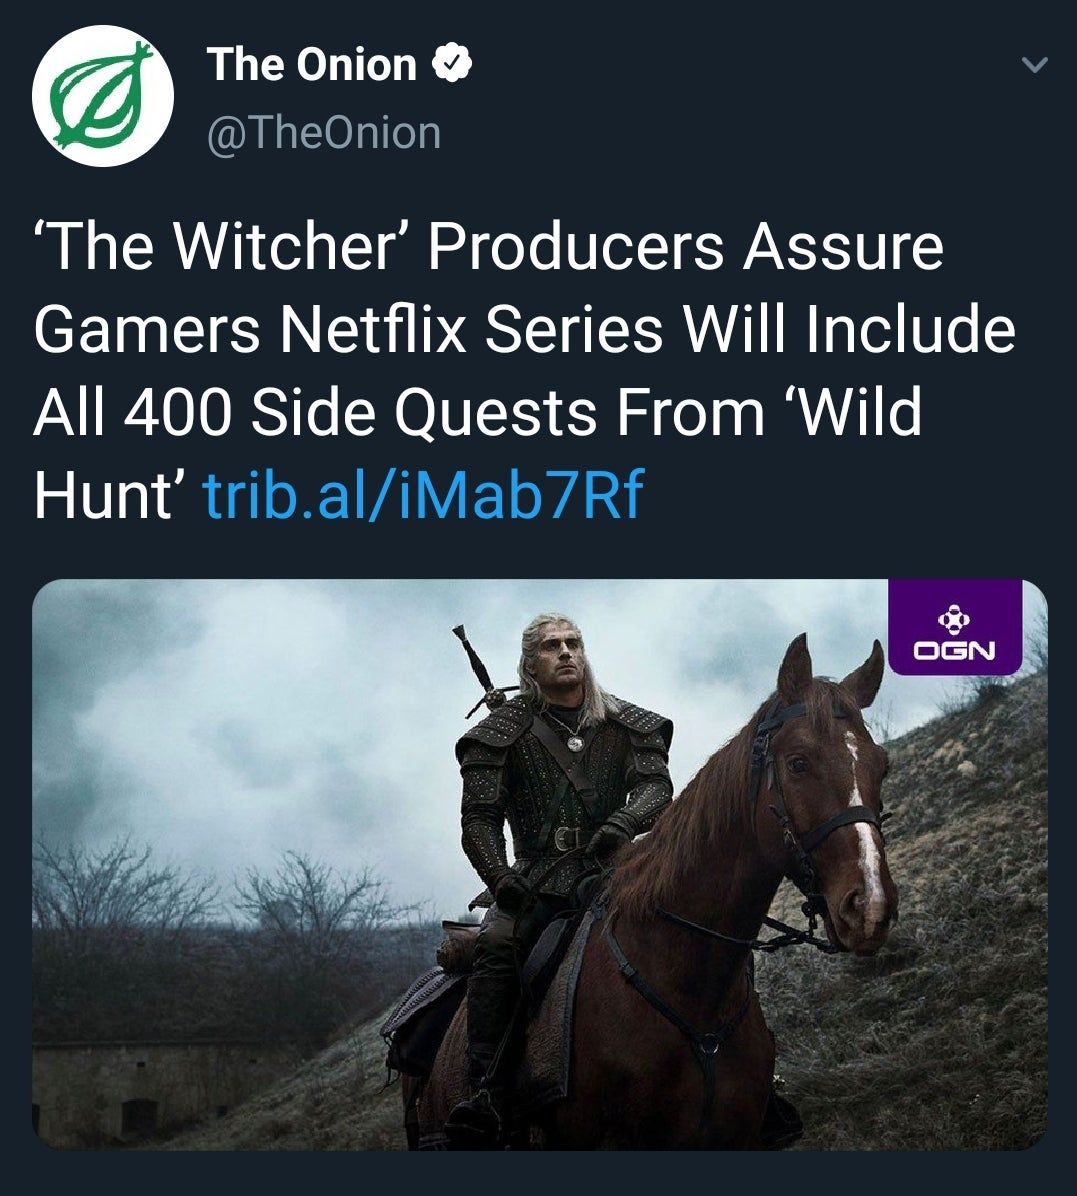 The Witcher - The Onion e 'The Witcher' Producers Assure Gamers Netflix Series Will Include All 400 Side Quests From Wild Hunt' trib.aliMab7Rf Ogn